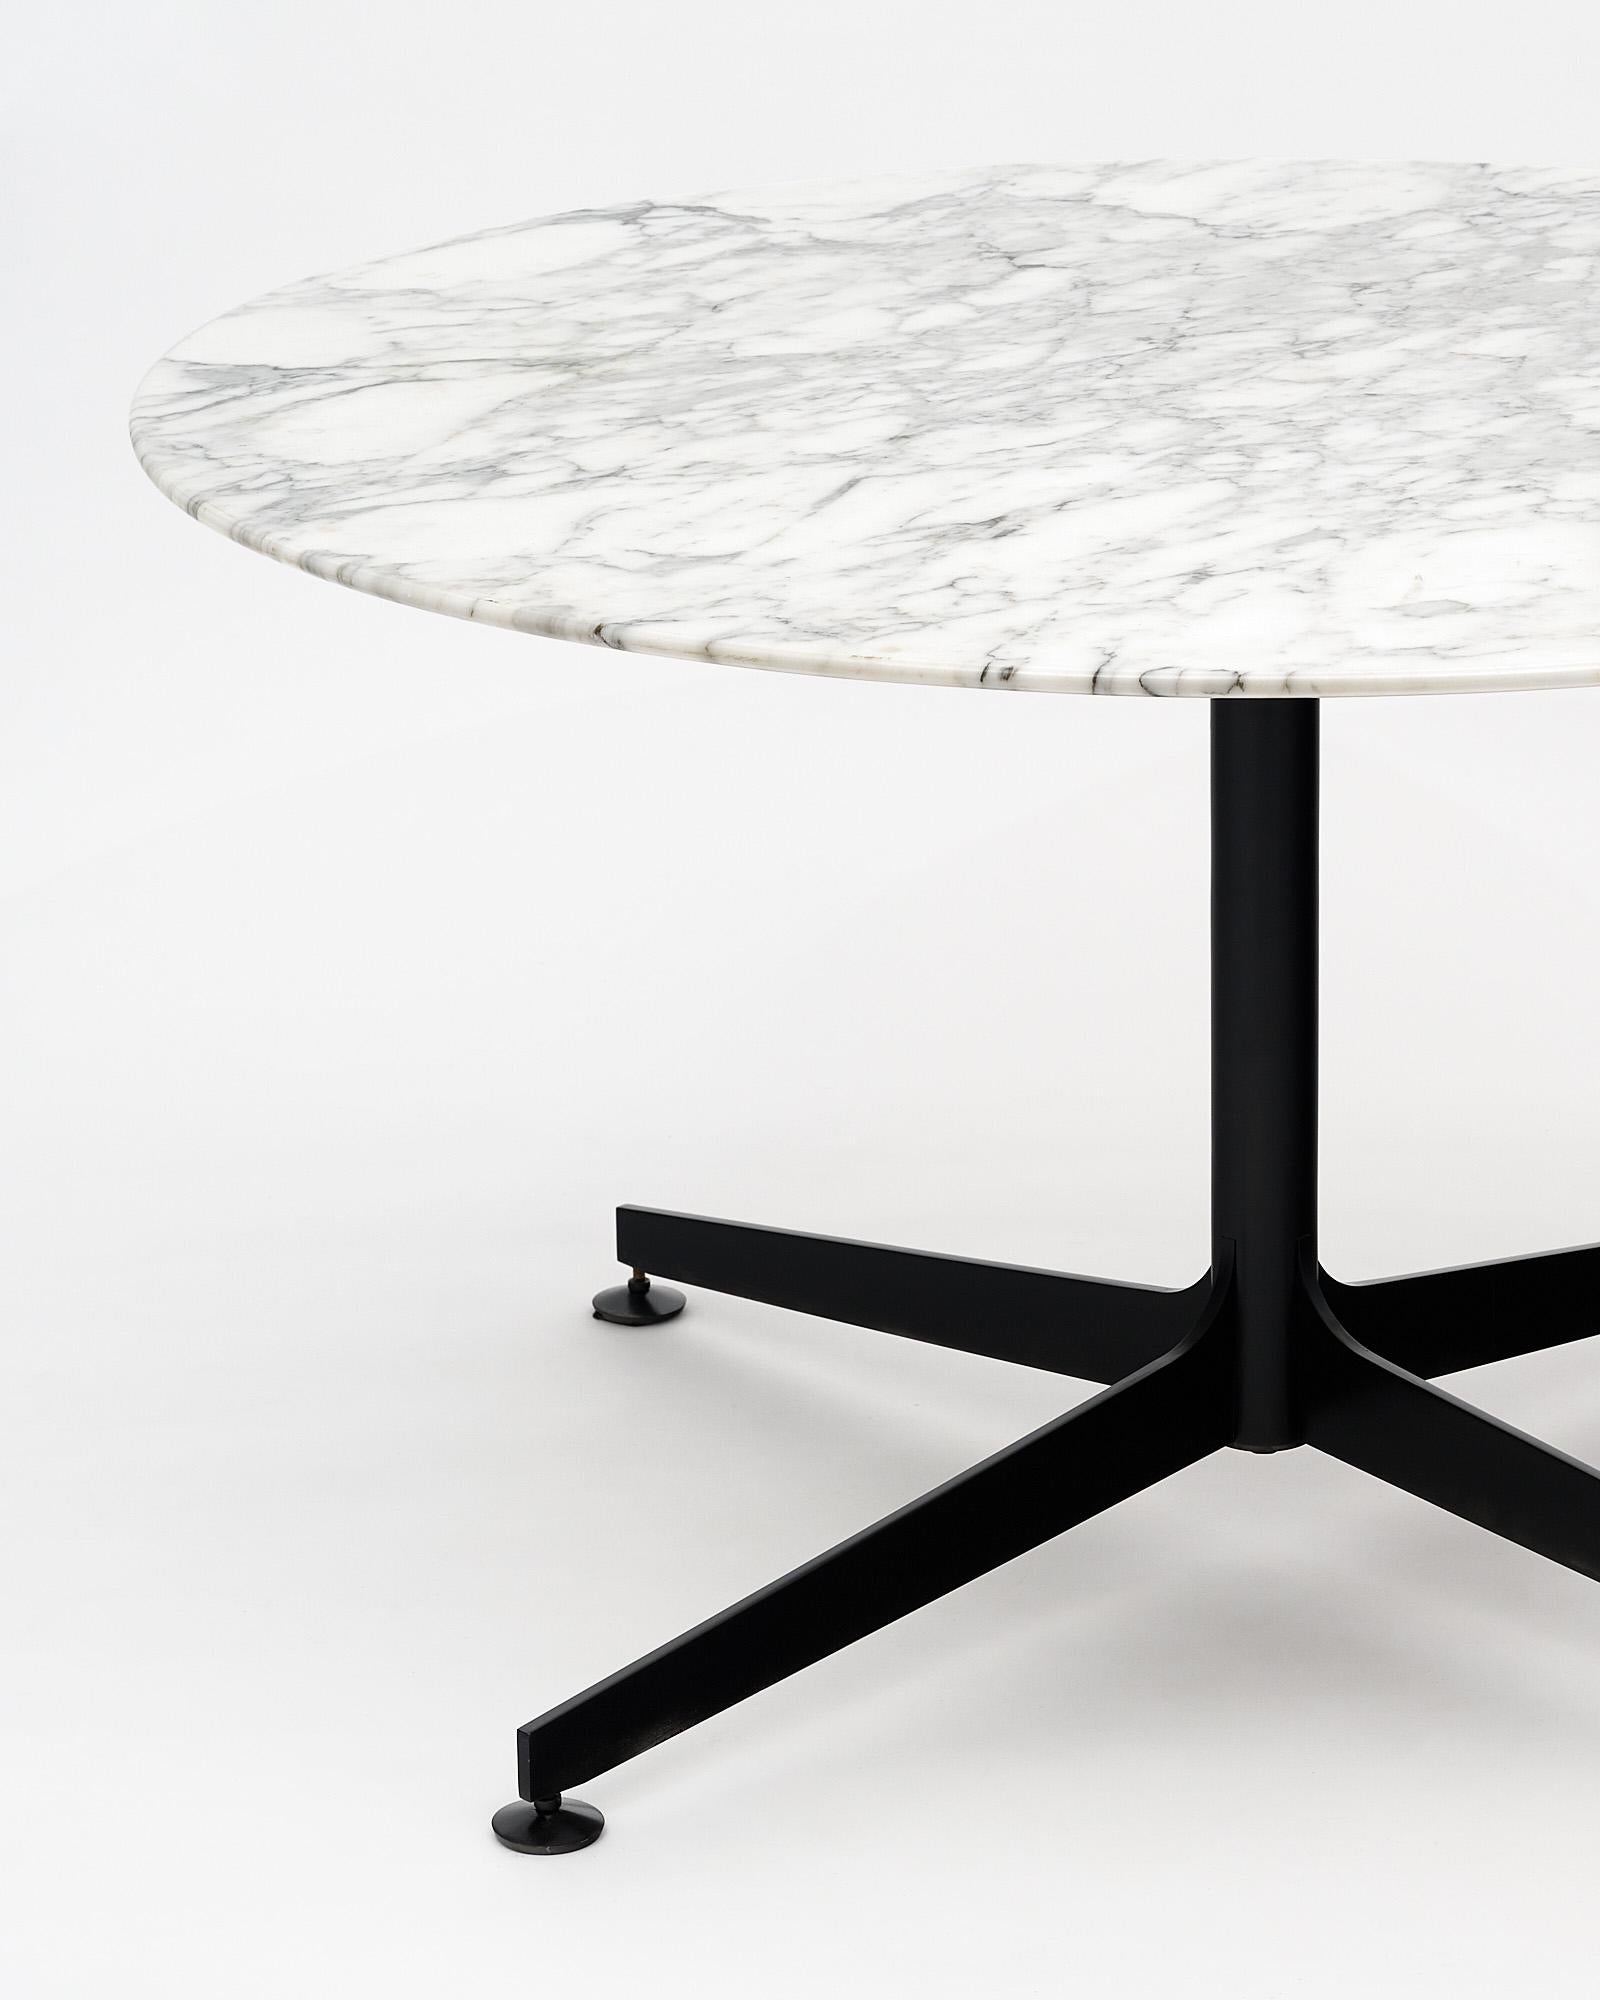 Round marble dining room table by Knoll with a black steel base supporting an intact, thick, veined Carrara slab. Adjustable feet.